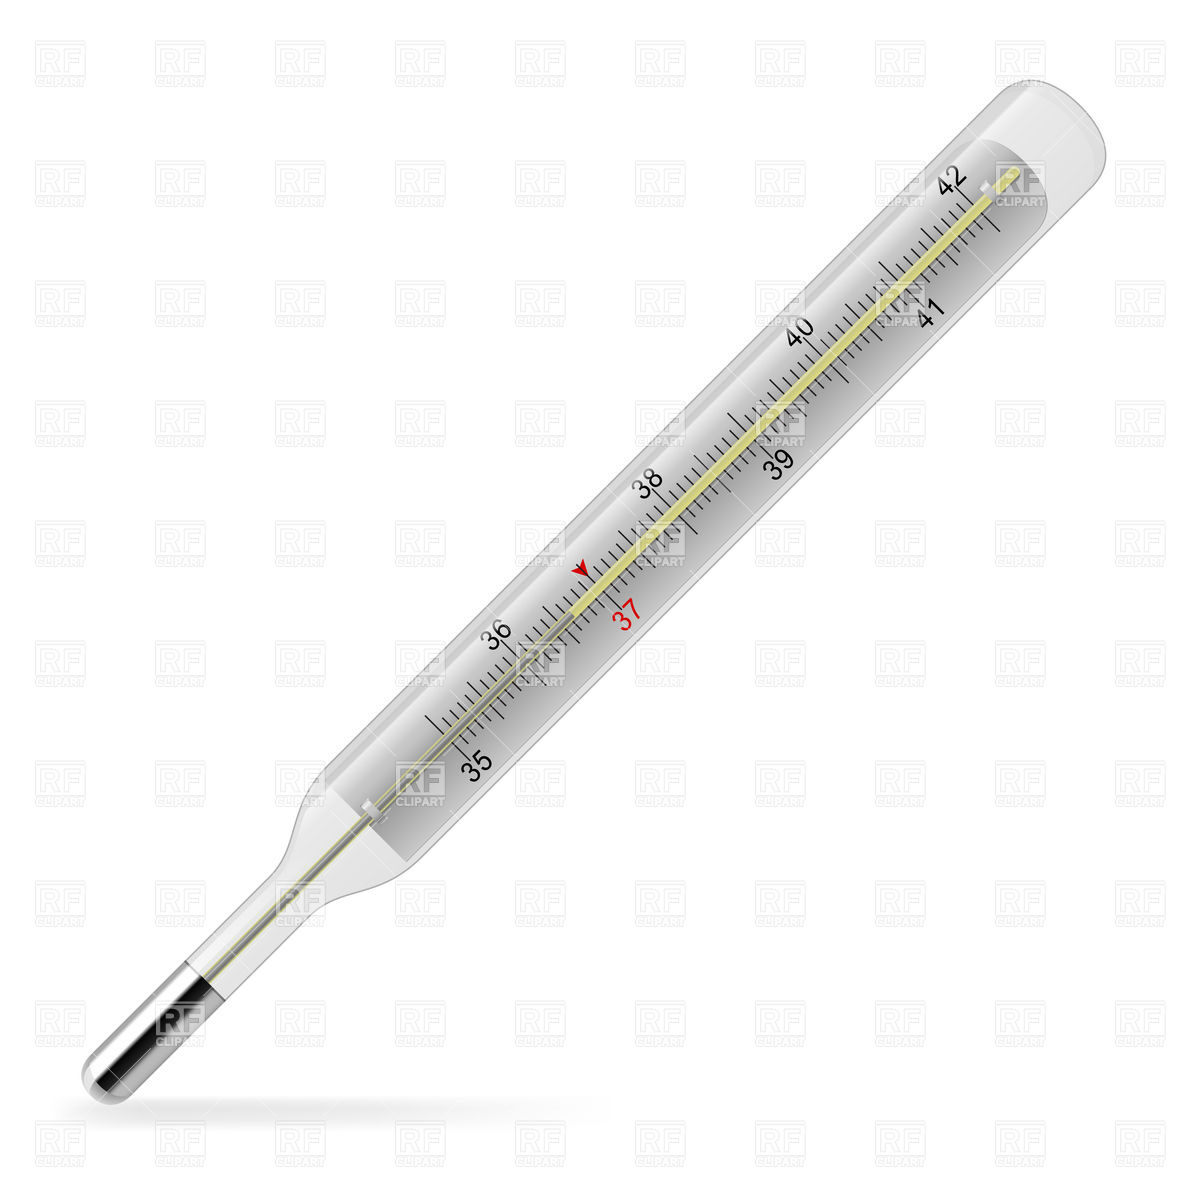      Filled Thermometer 6748 Download Royalty Free Vector Clipart  Eps